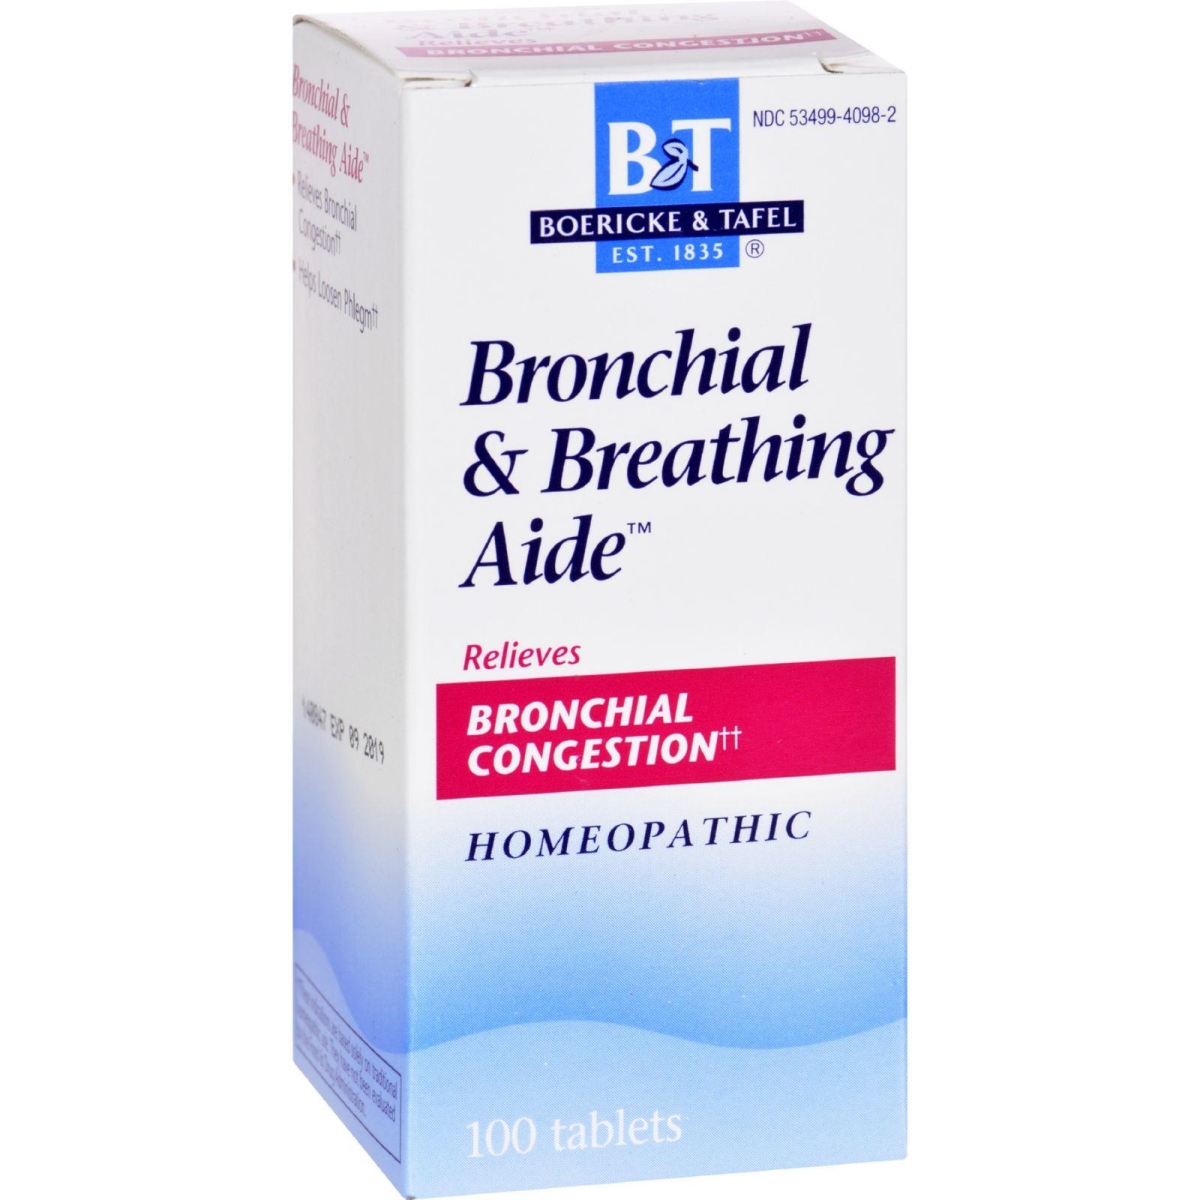 Boericke And Tafel Hg0468389 Bronchitis & Asthma Aide - 100 Tablets